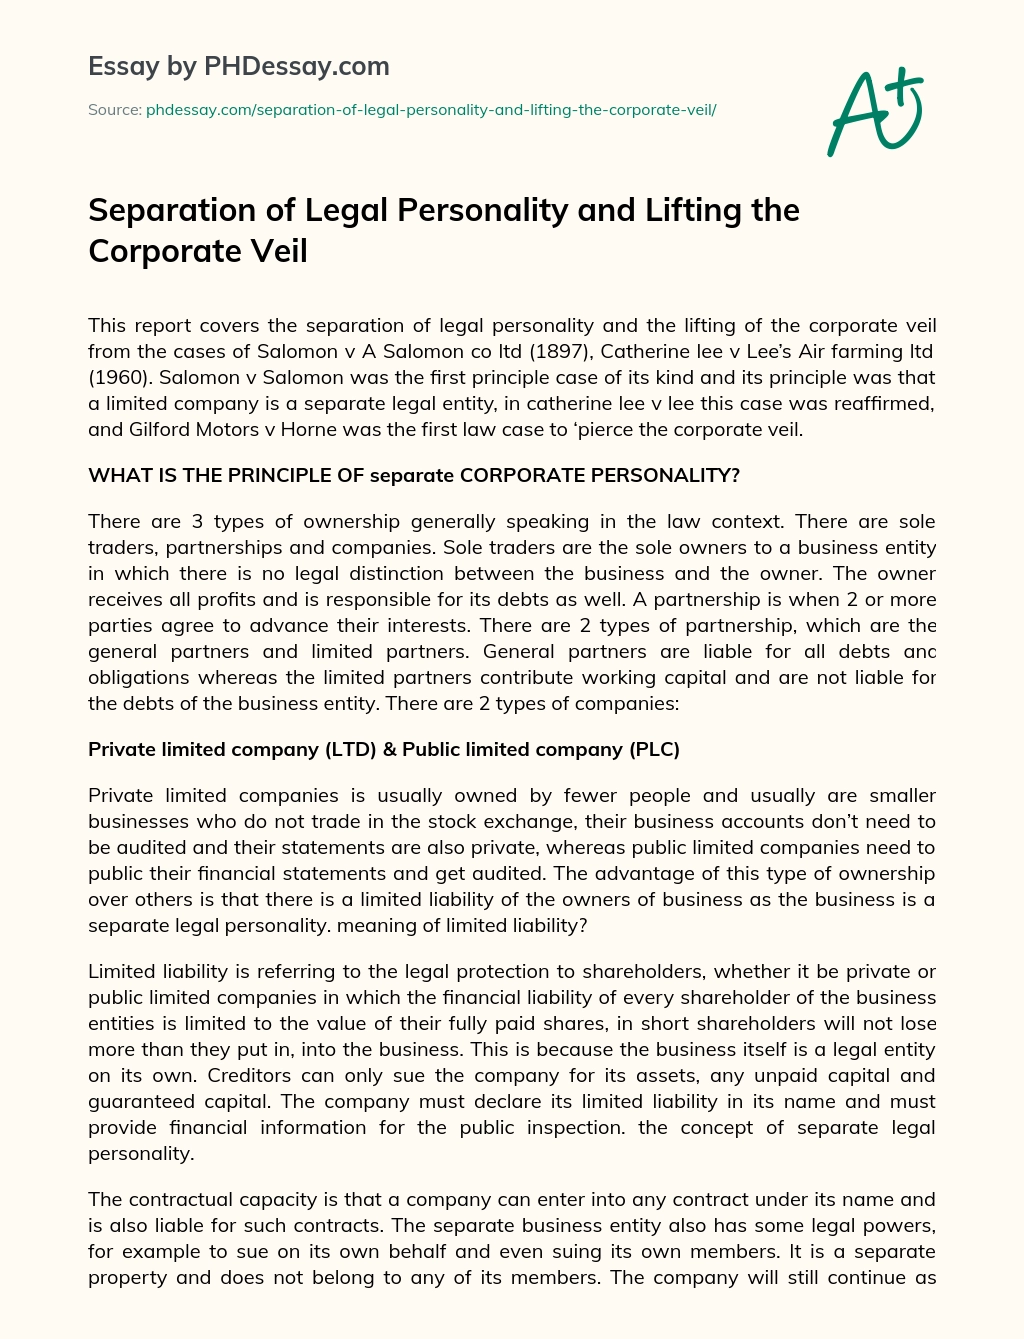 Separation of Legal Personality and Lifting the Corporate Veil essay